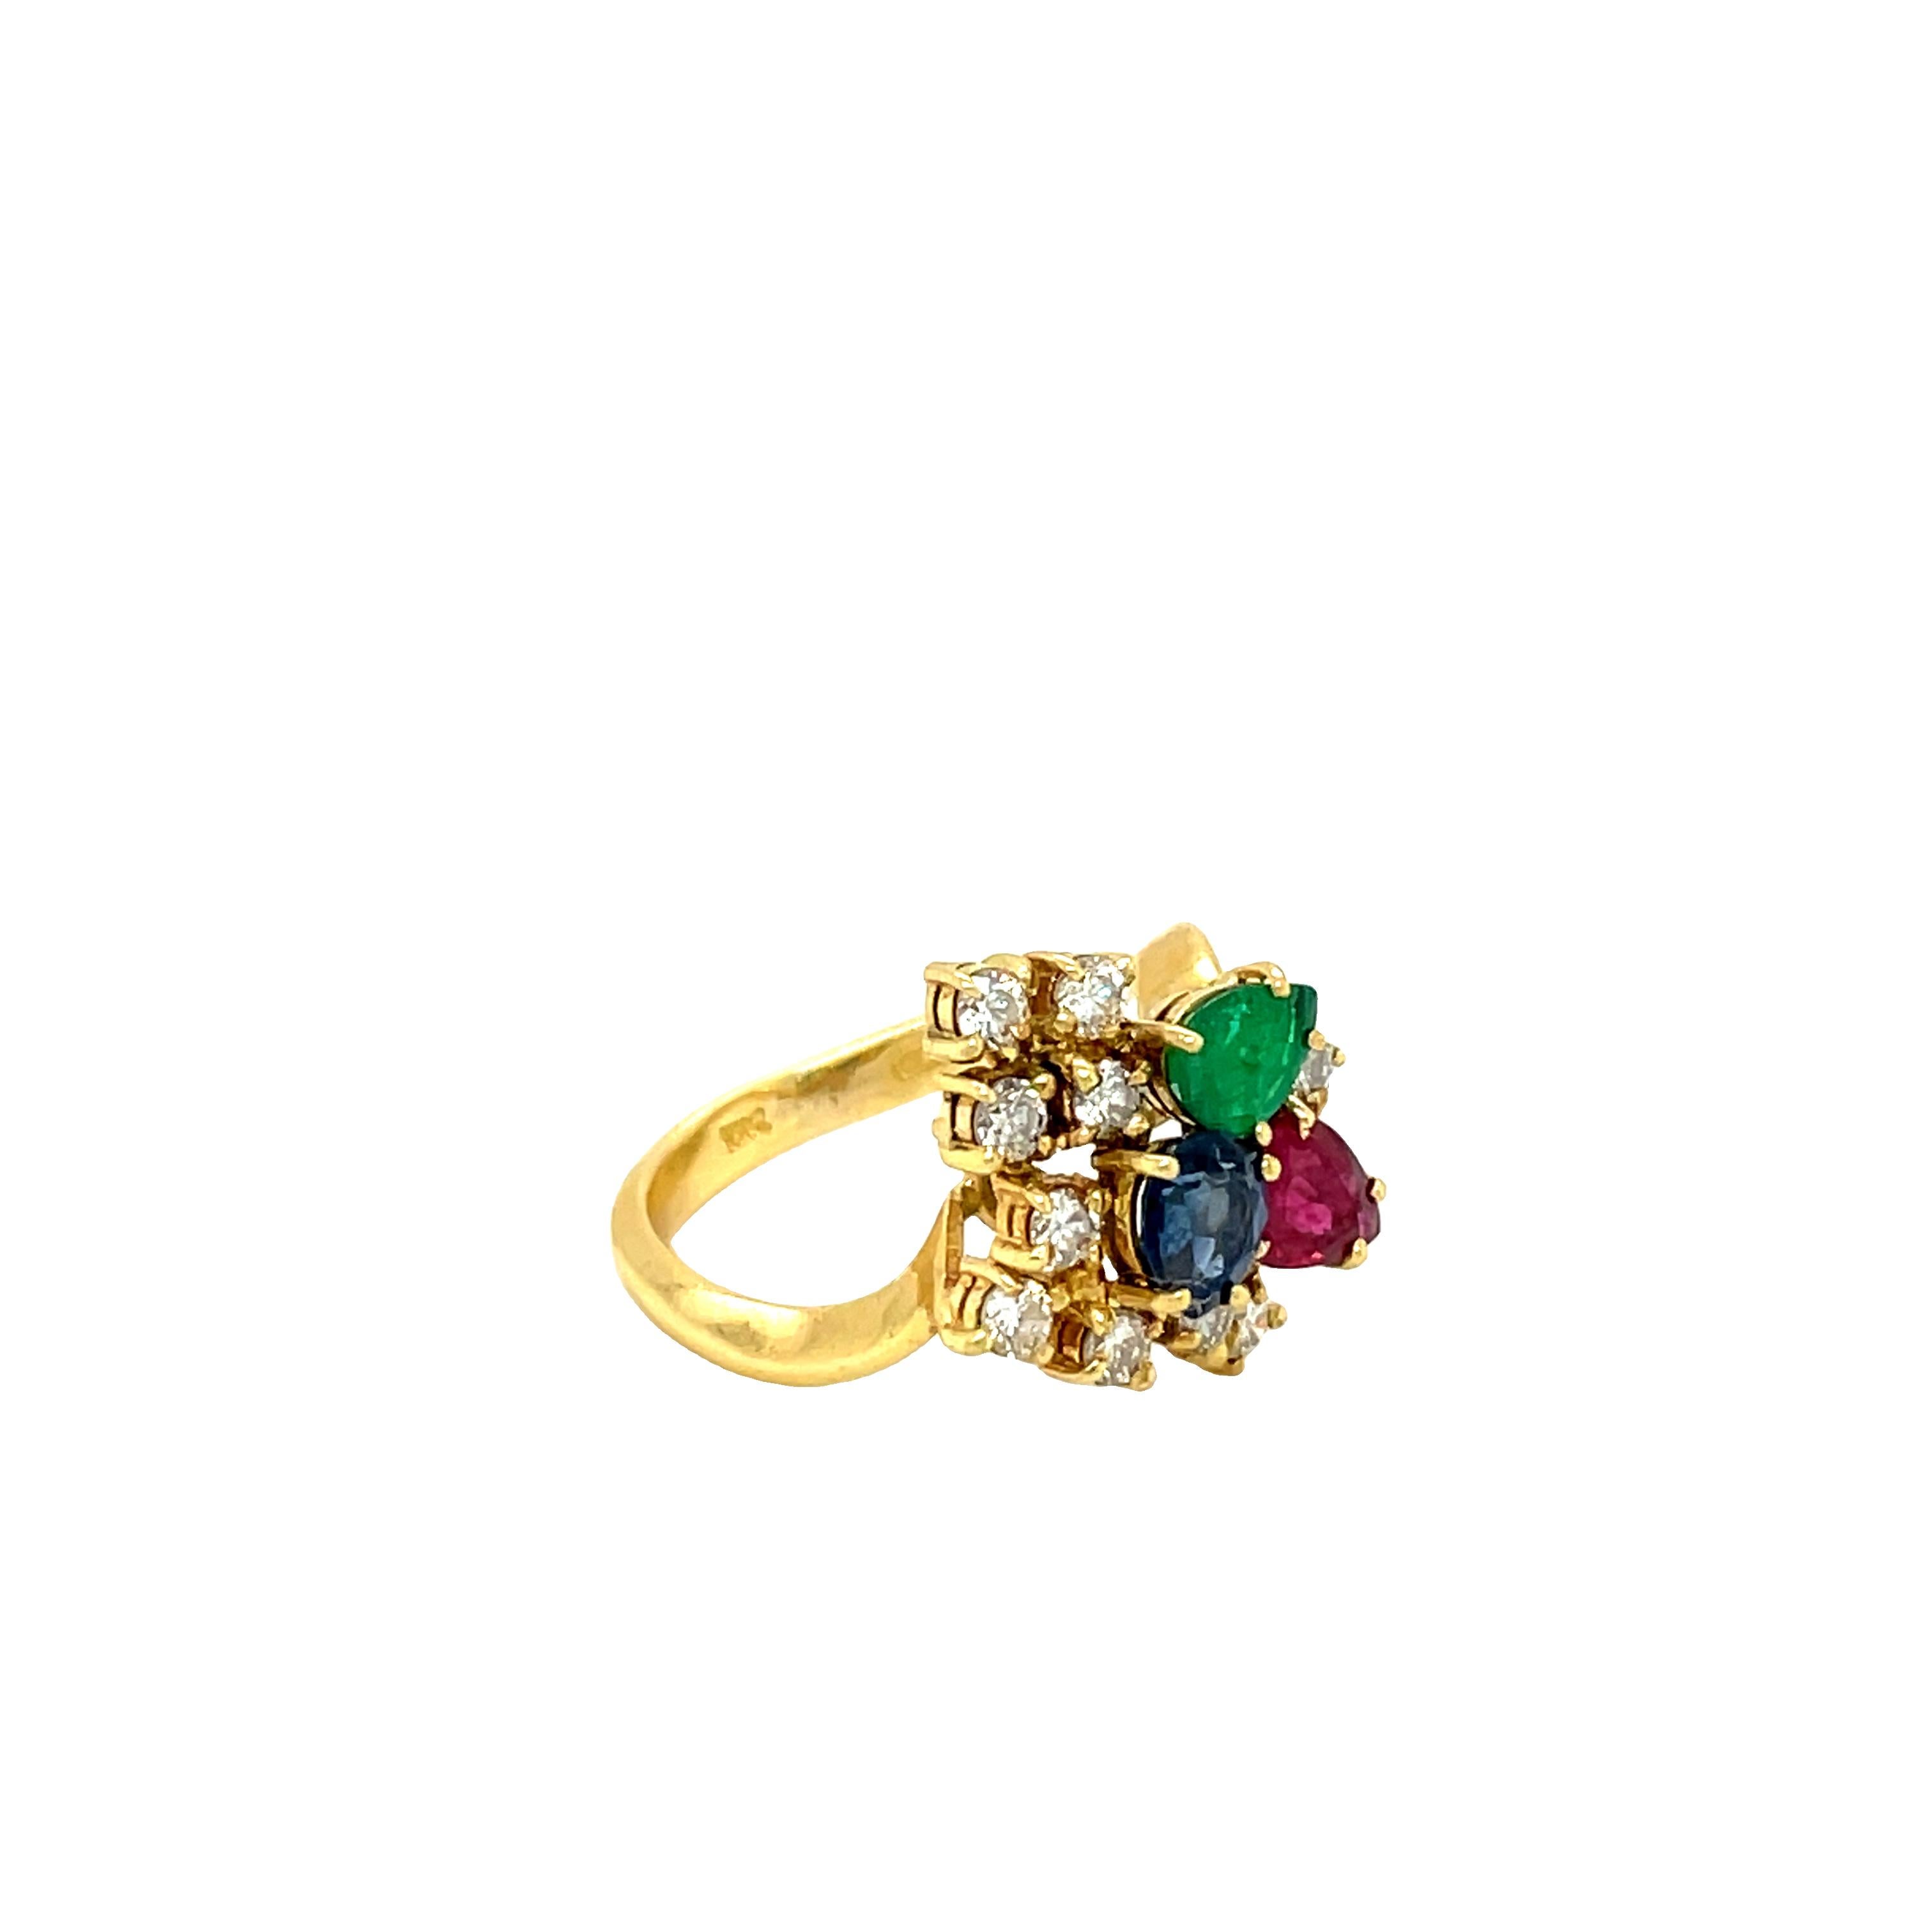 This stunning and impressive gemstone cluster ring has been crafted in 18k yellow gold featuring ten round brilliant cut diamonds weighing approx. 0.80 carats, G-H color, VS clarity,  one pear shape ruby, one pear shape sapphire, one pear shape